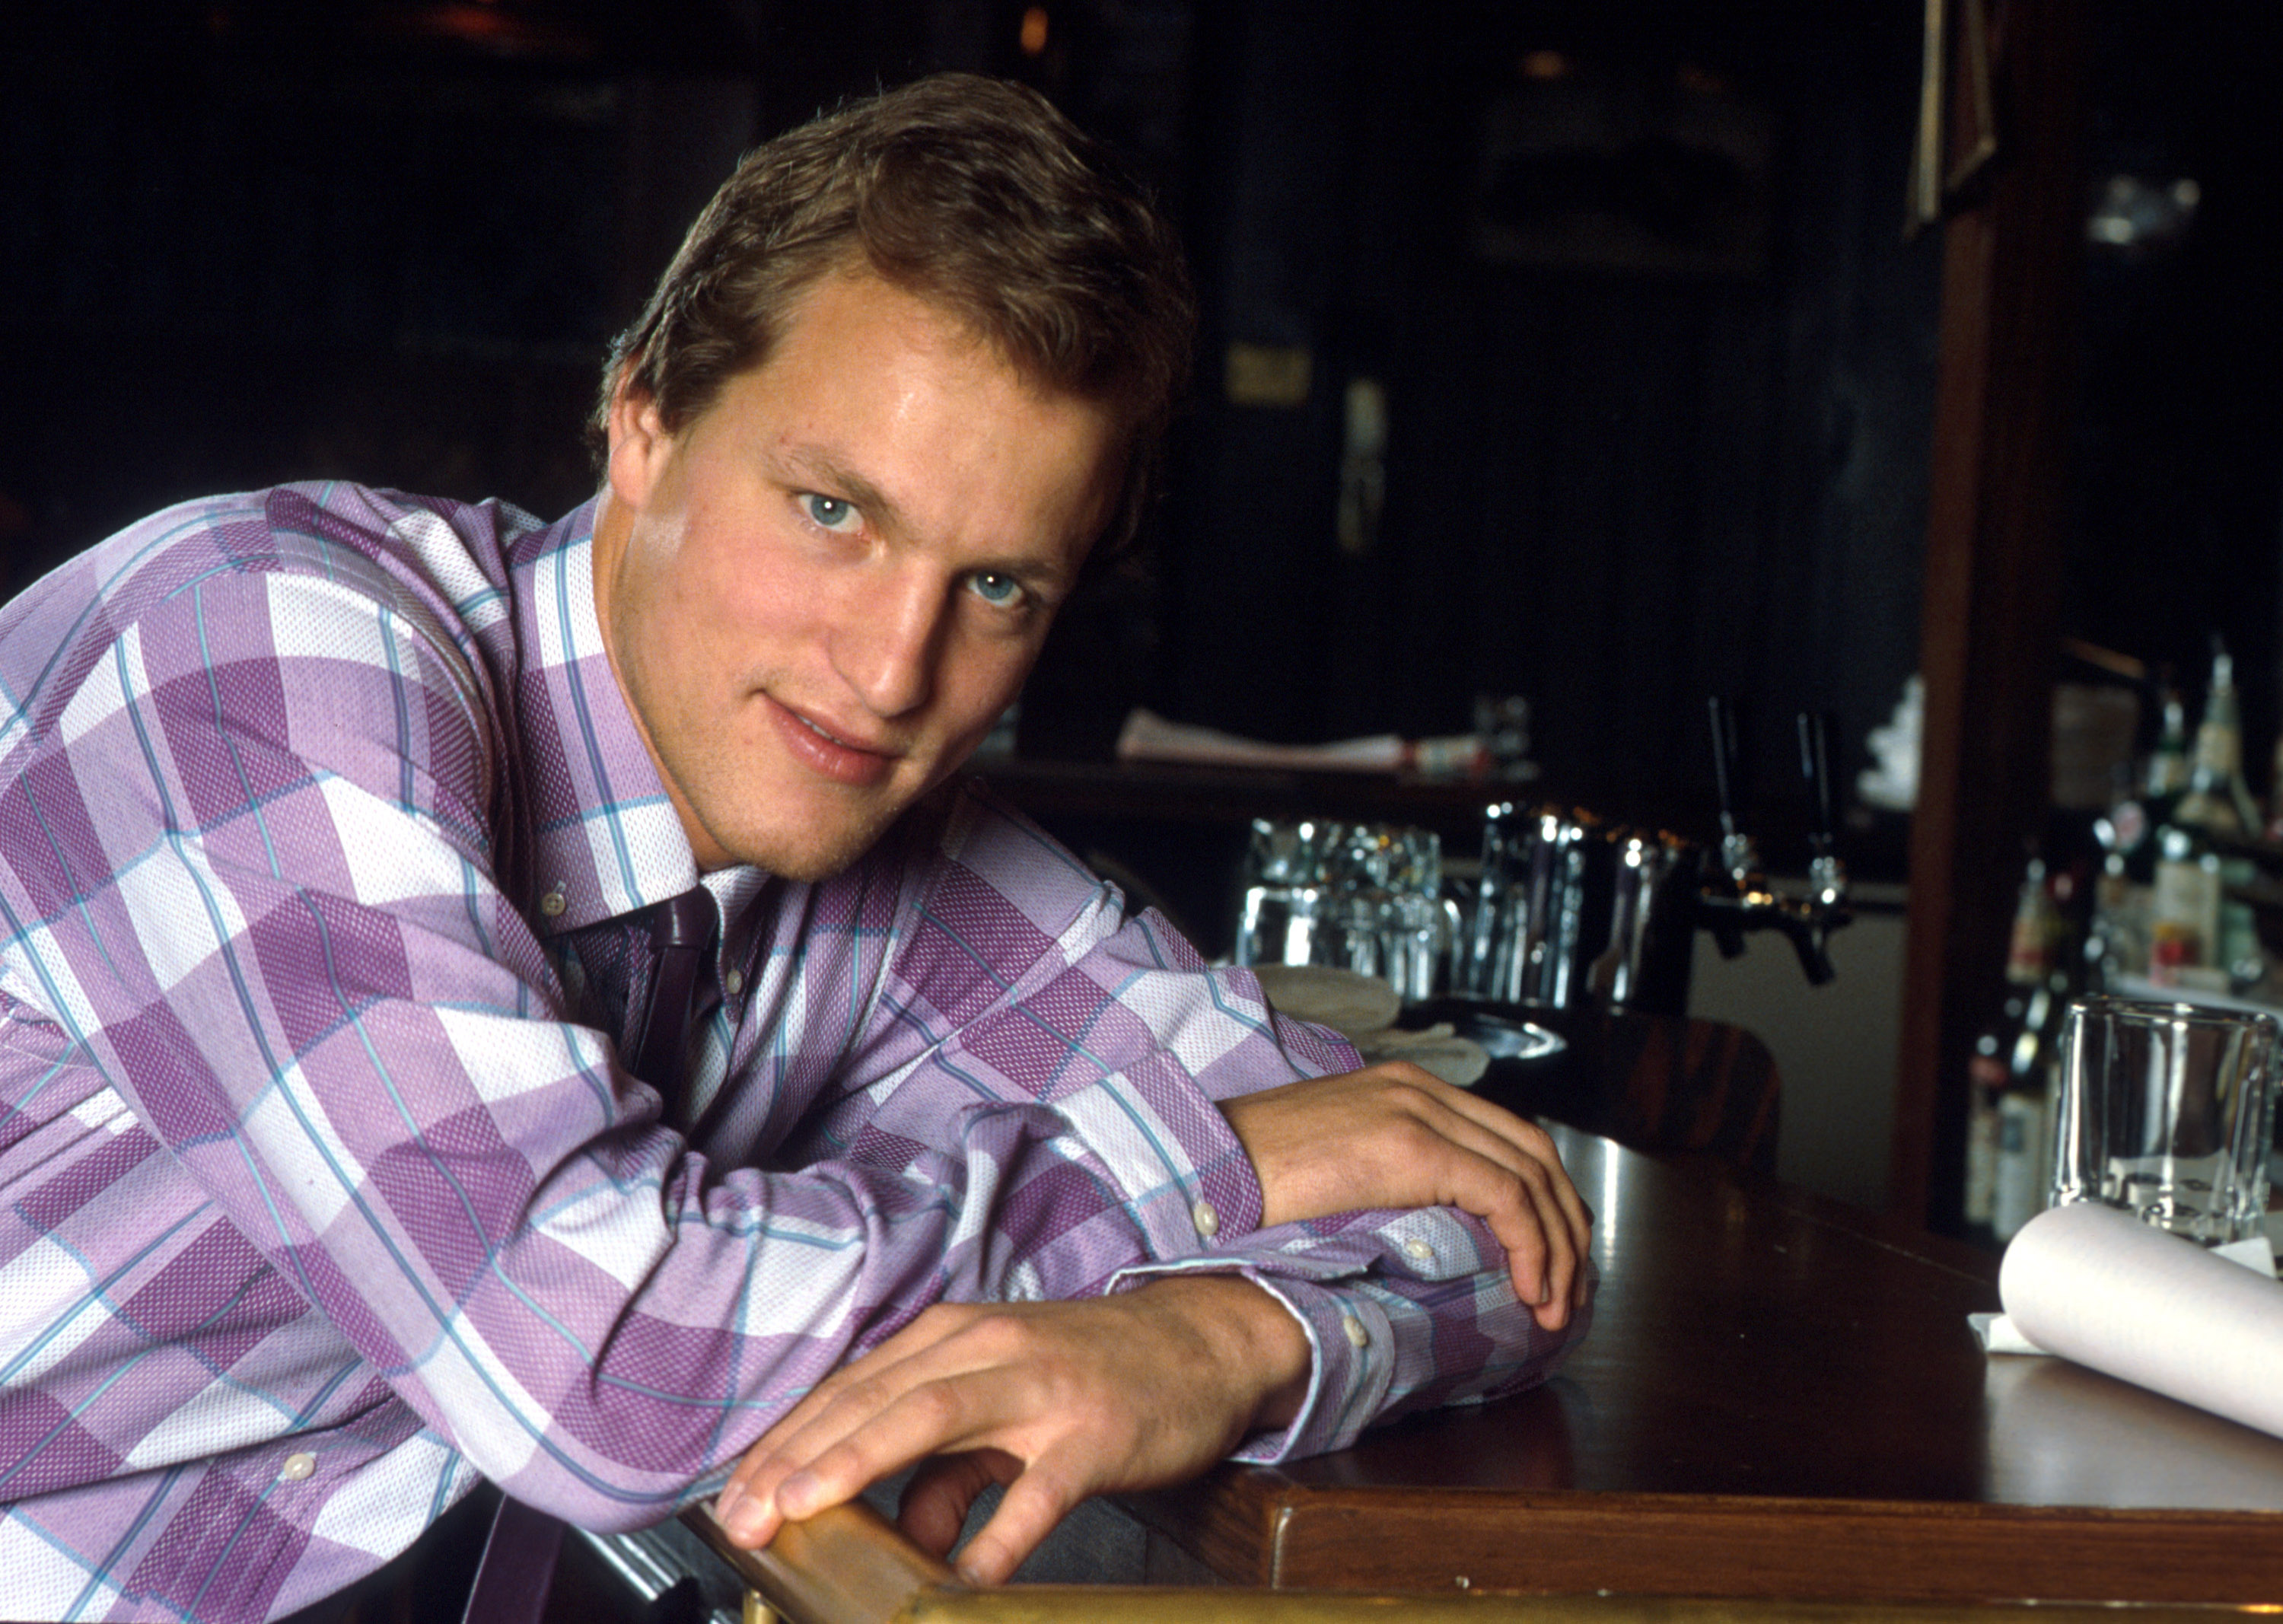 woody harrelson, actor, young Wallpaper, HD Man 4K Wallpapers, Images ...